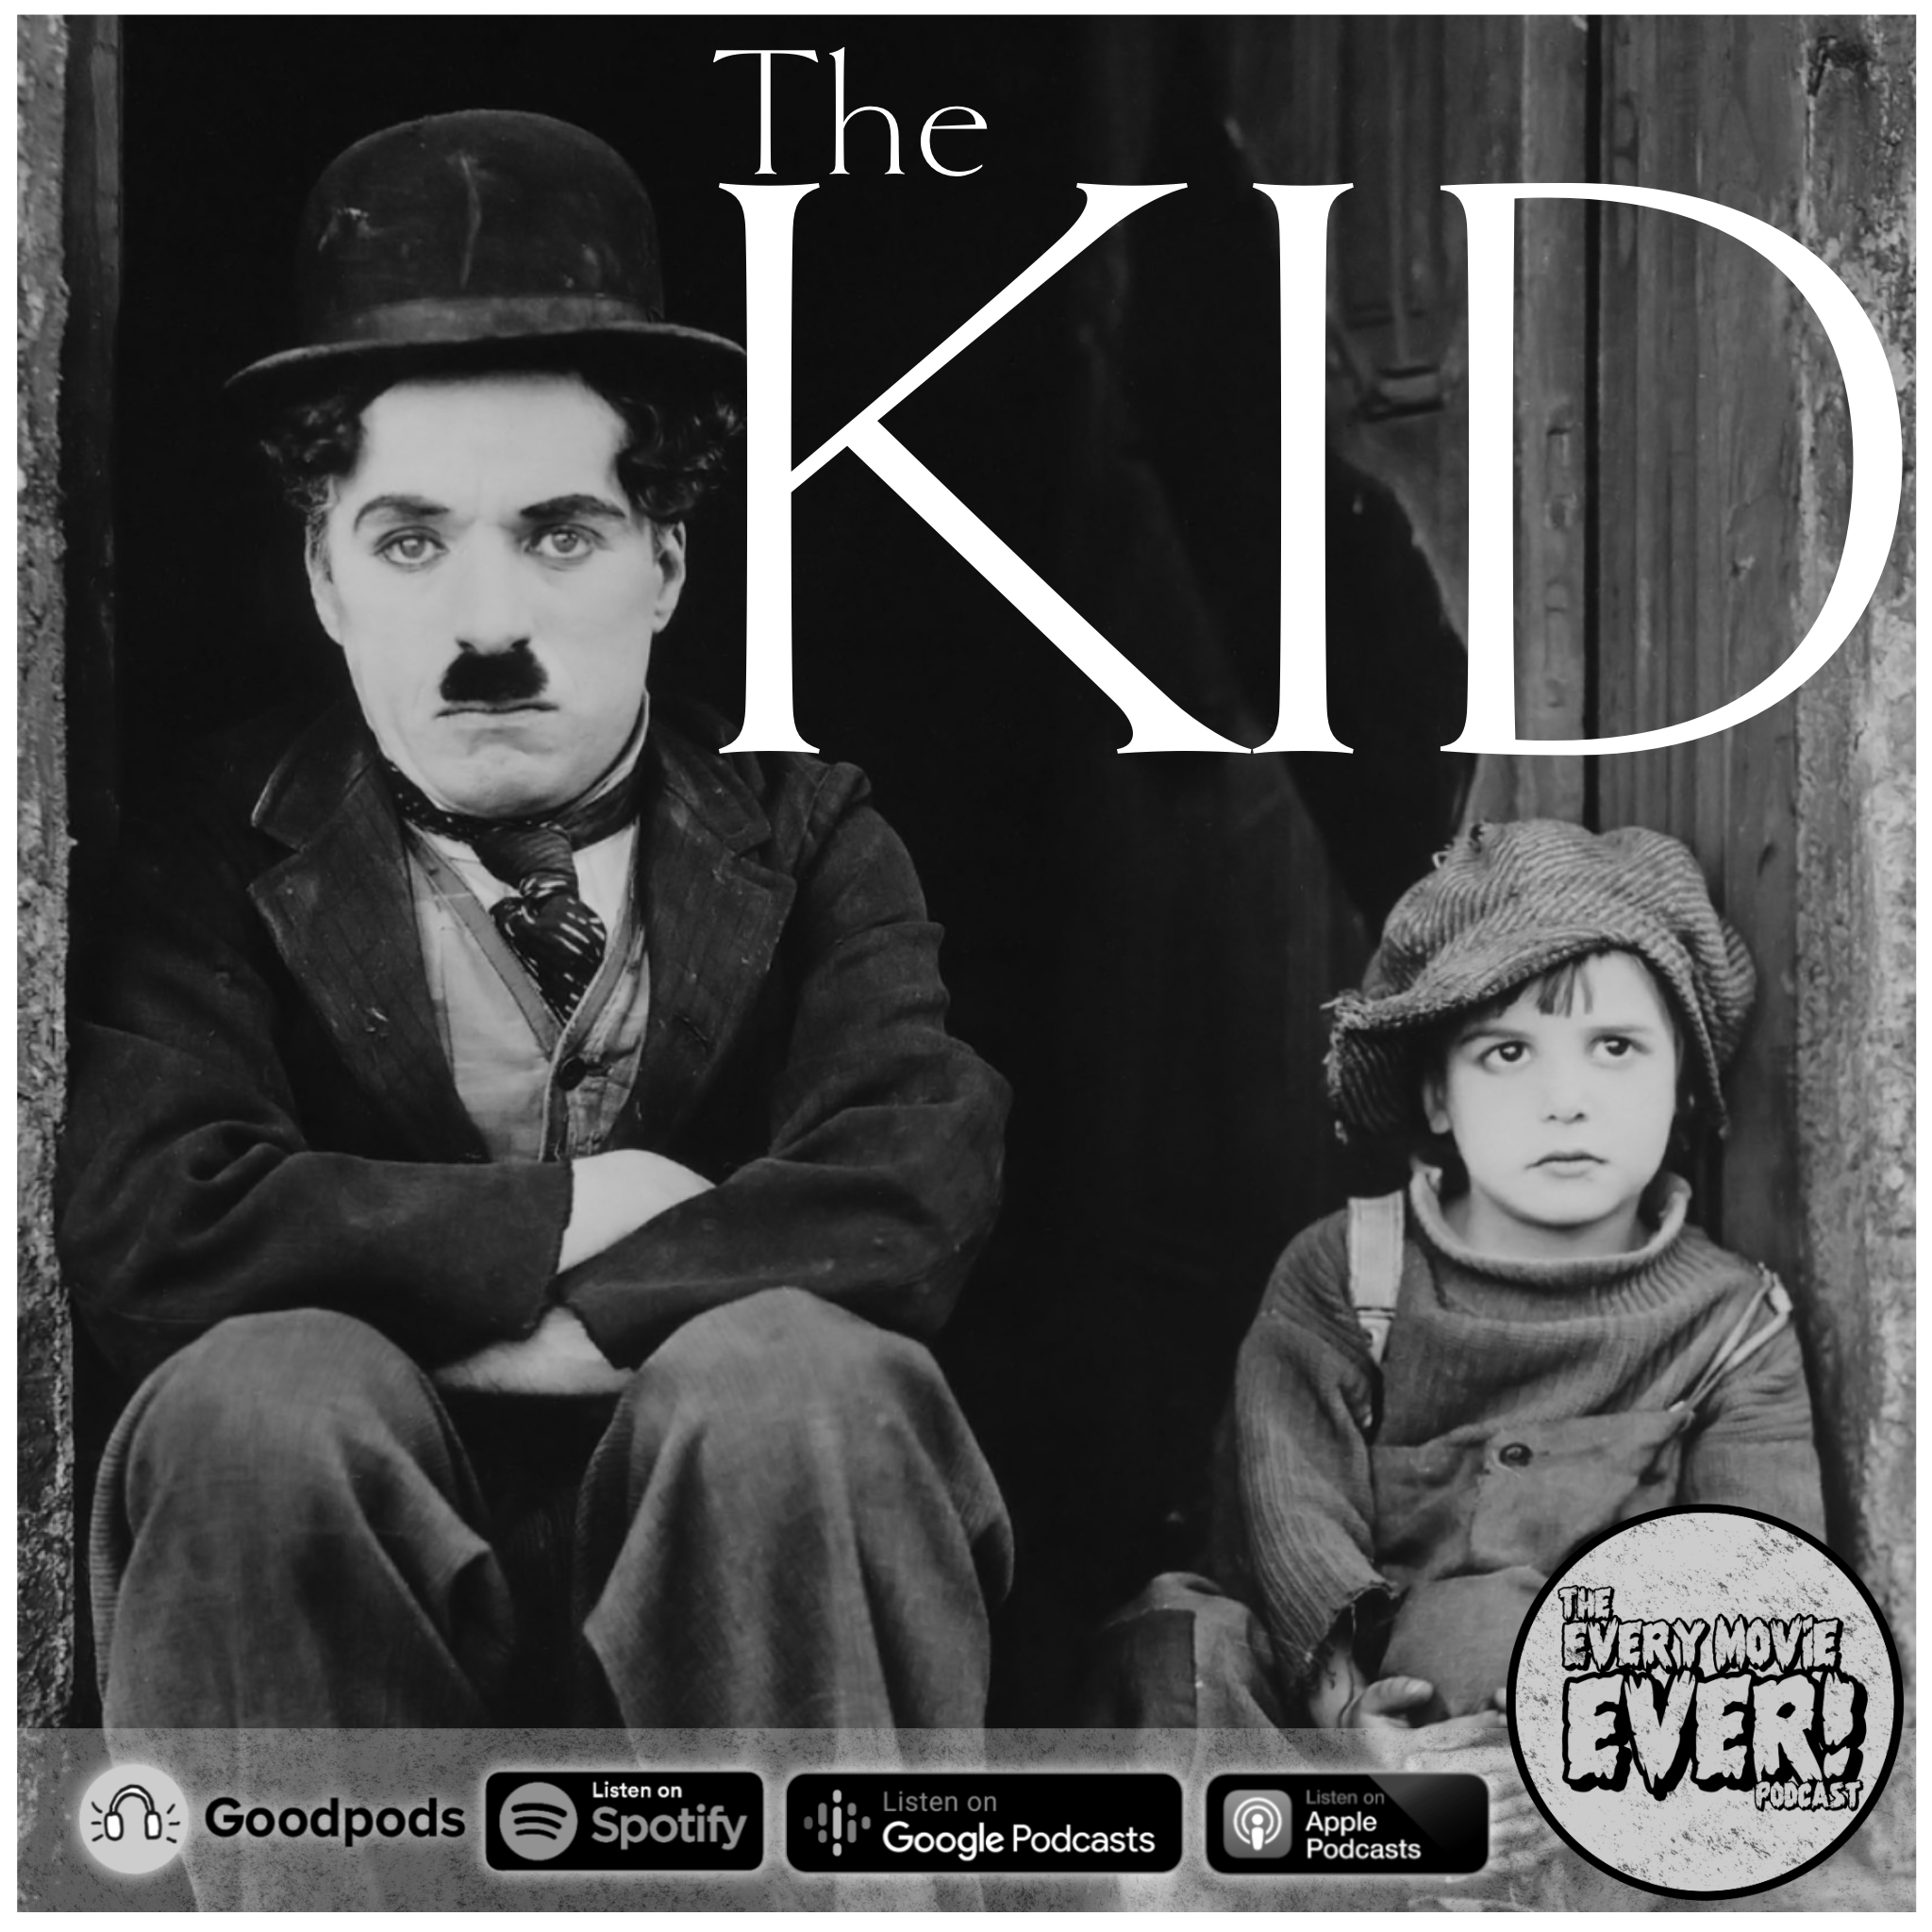 The Kid (1921): Our First Look At Cinema's First Superstar, First Child Star and First Dramedy!